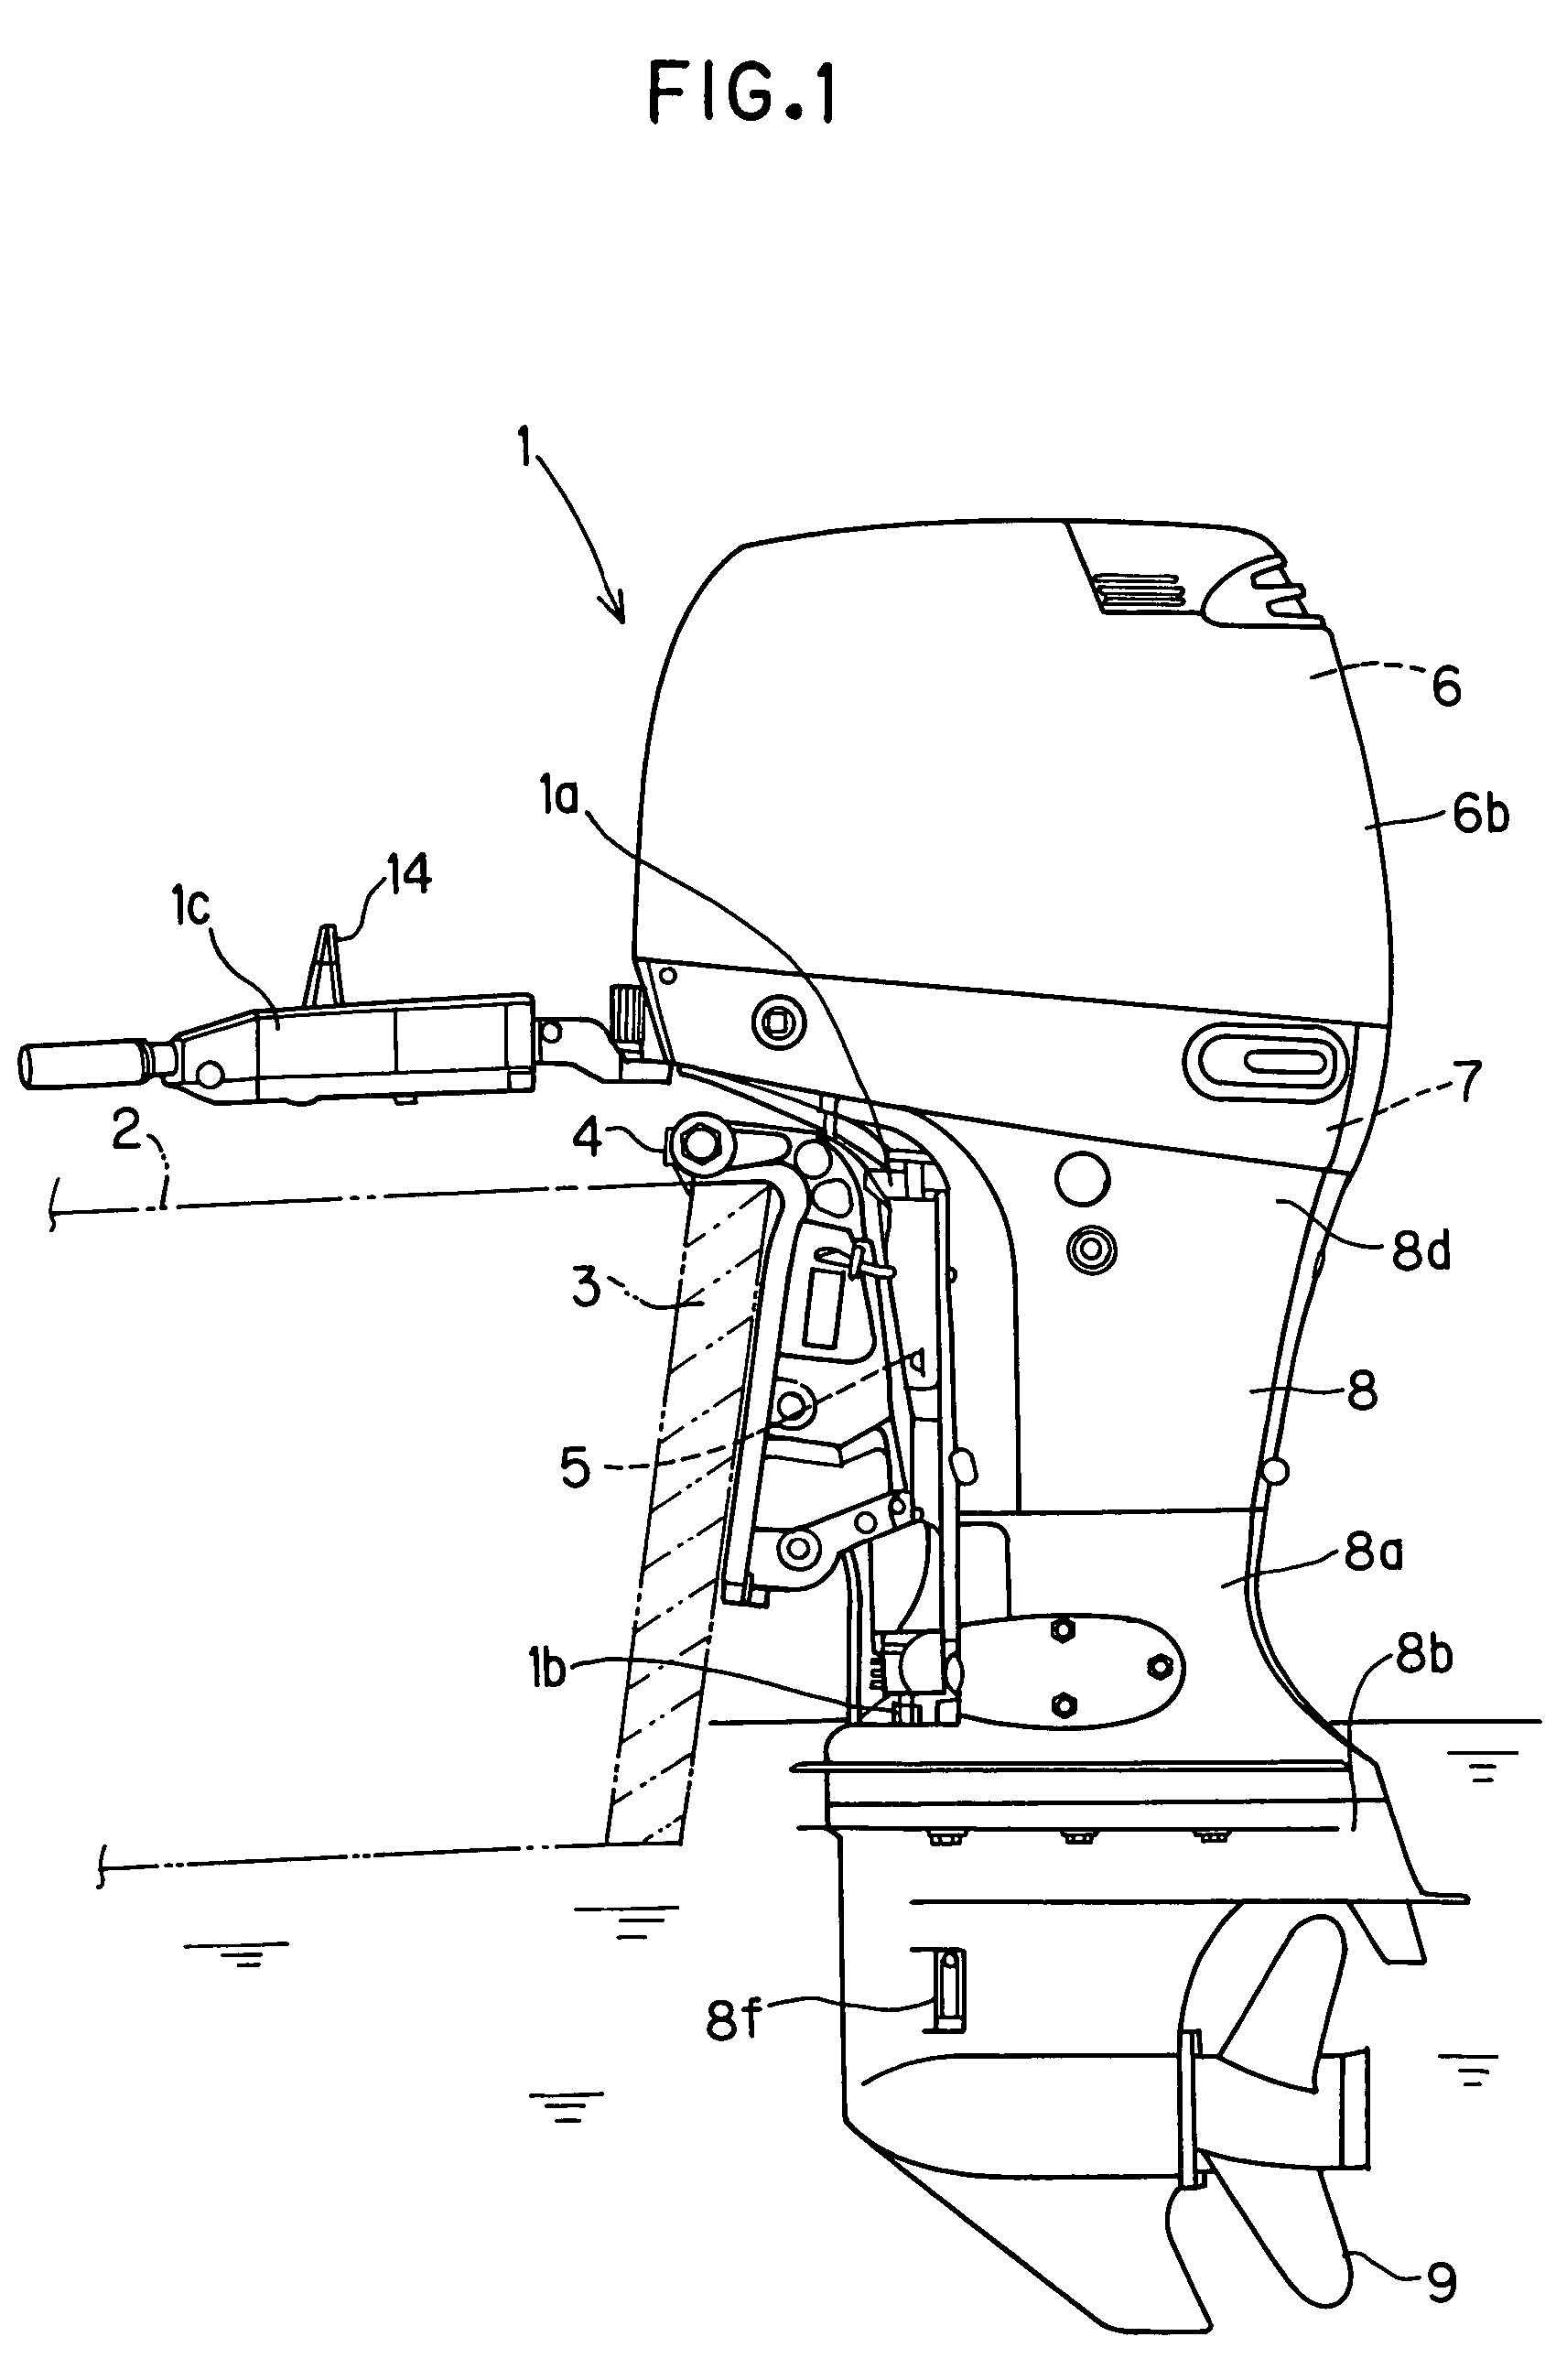 Cooling water pump device for outboard motor